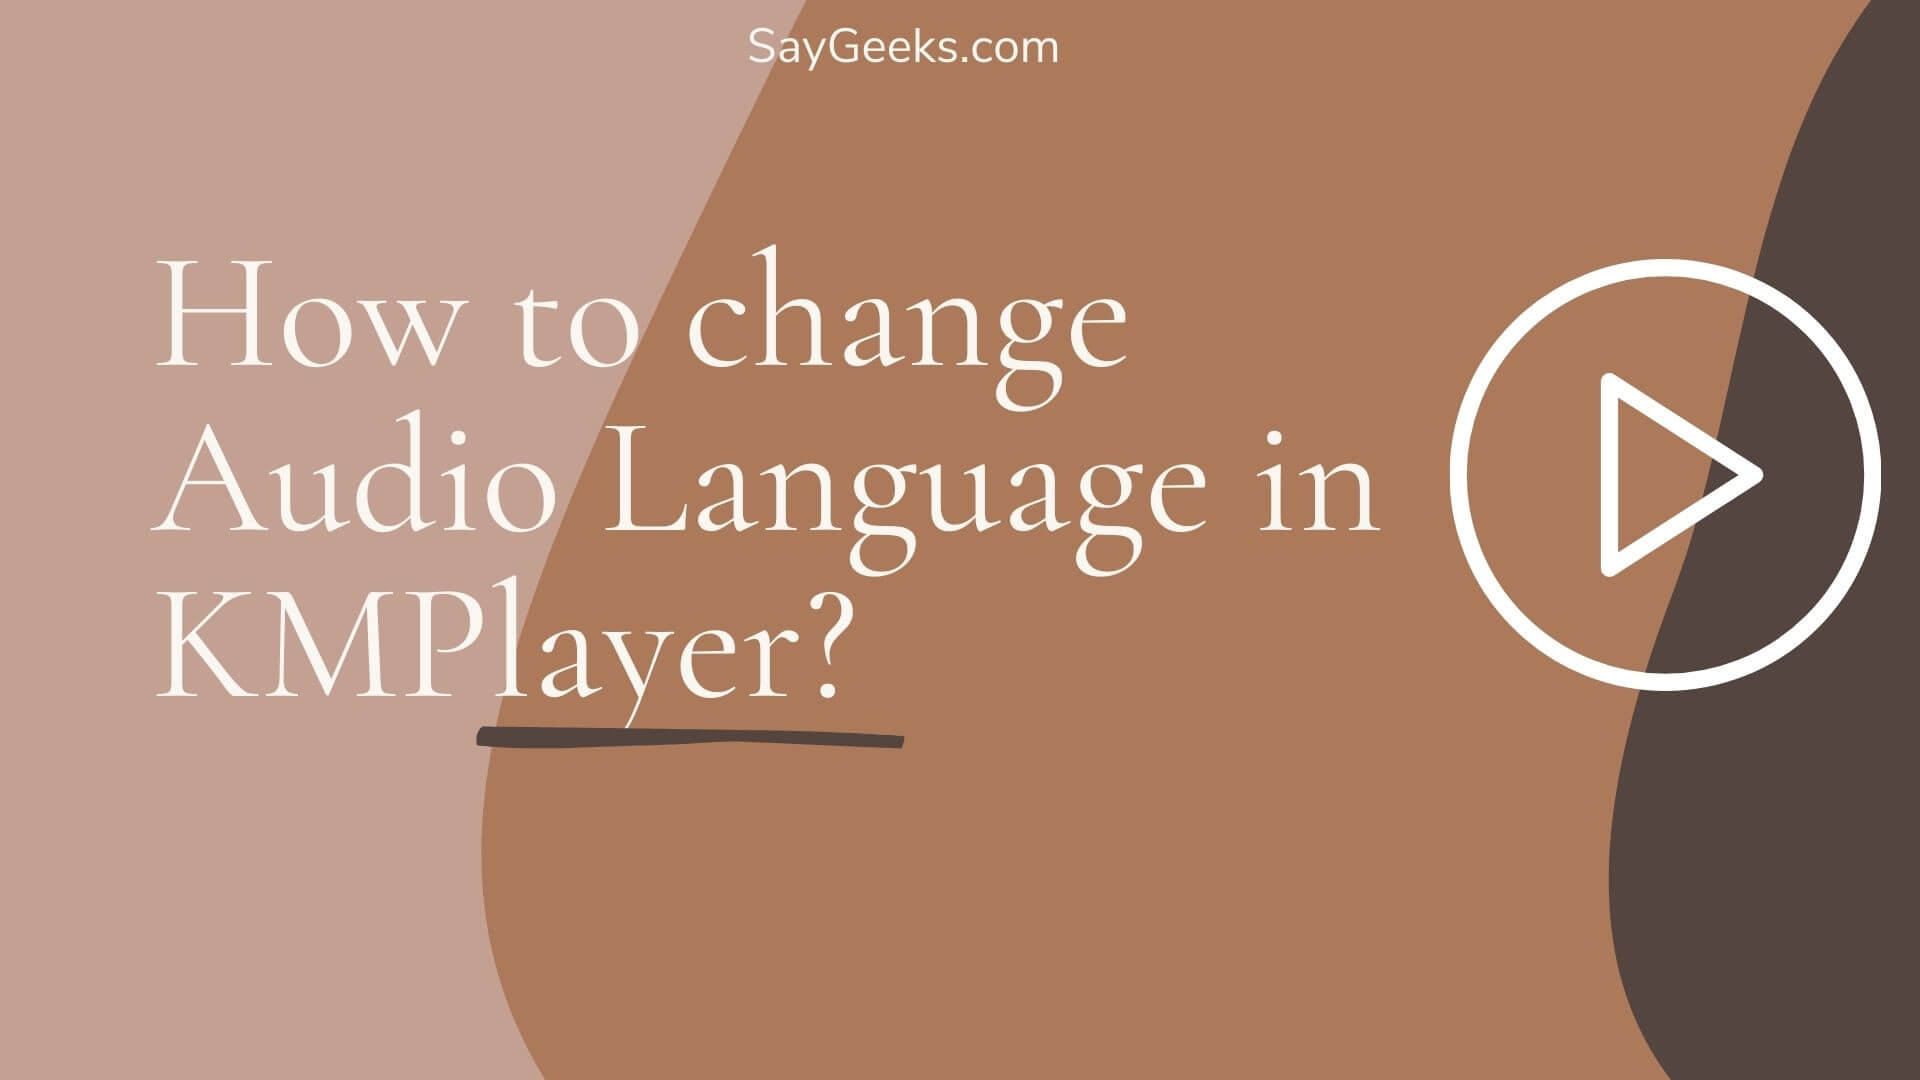 How to change Audio Language in KMPlayer